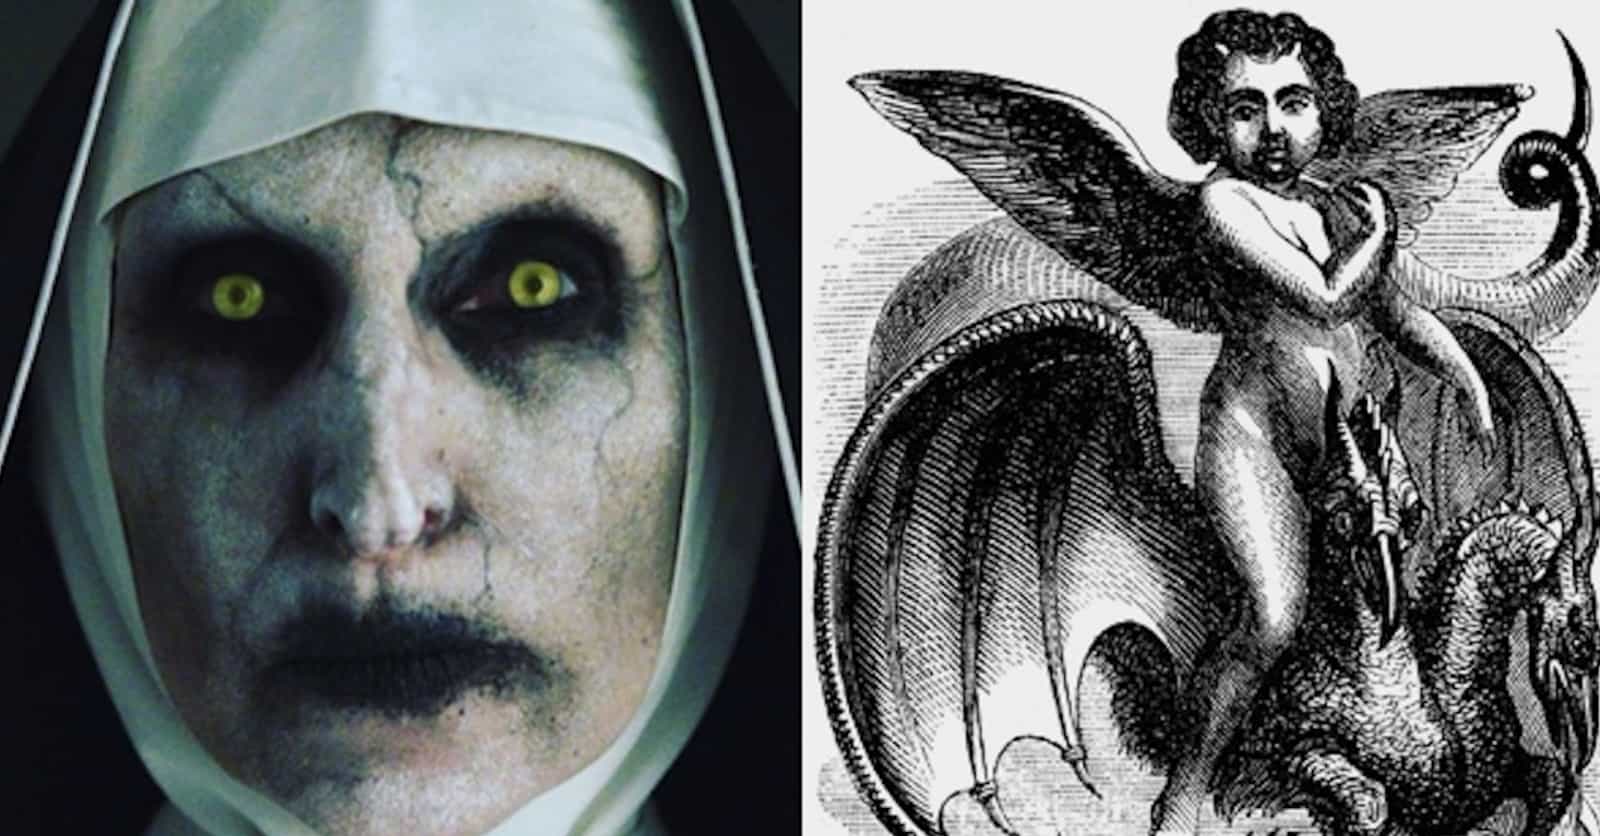 How To Summon Valak, The Demon Featured In 'The Conjuring 2' And 'The Nun'